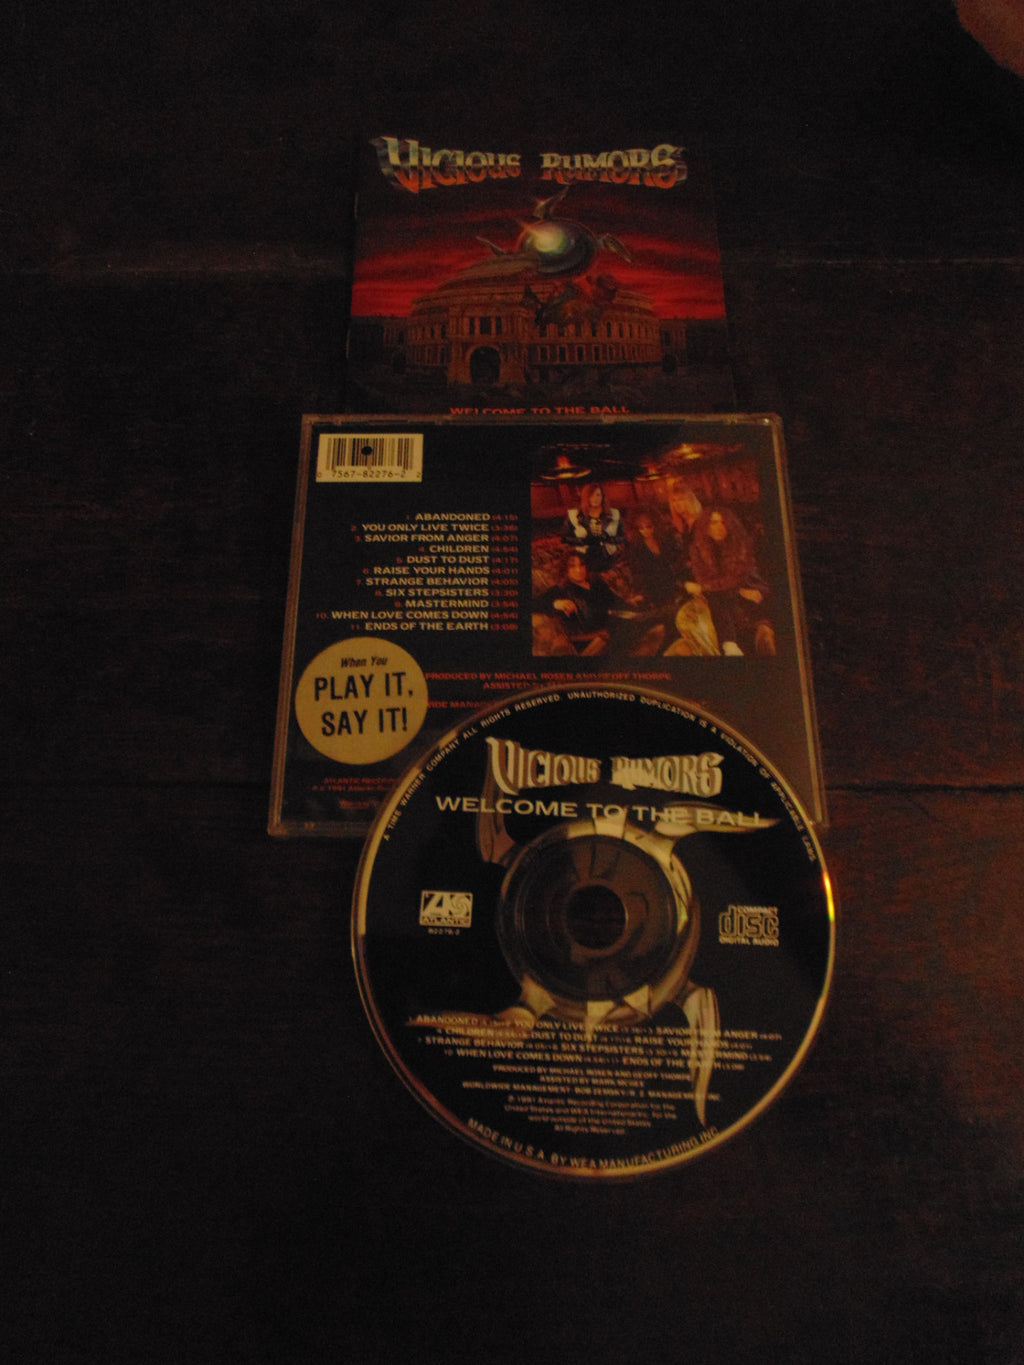 Vicious Rumors CD, Welcome to the Ball, Original 1991 Pressing